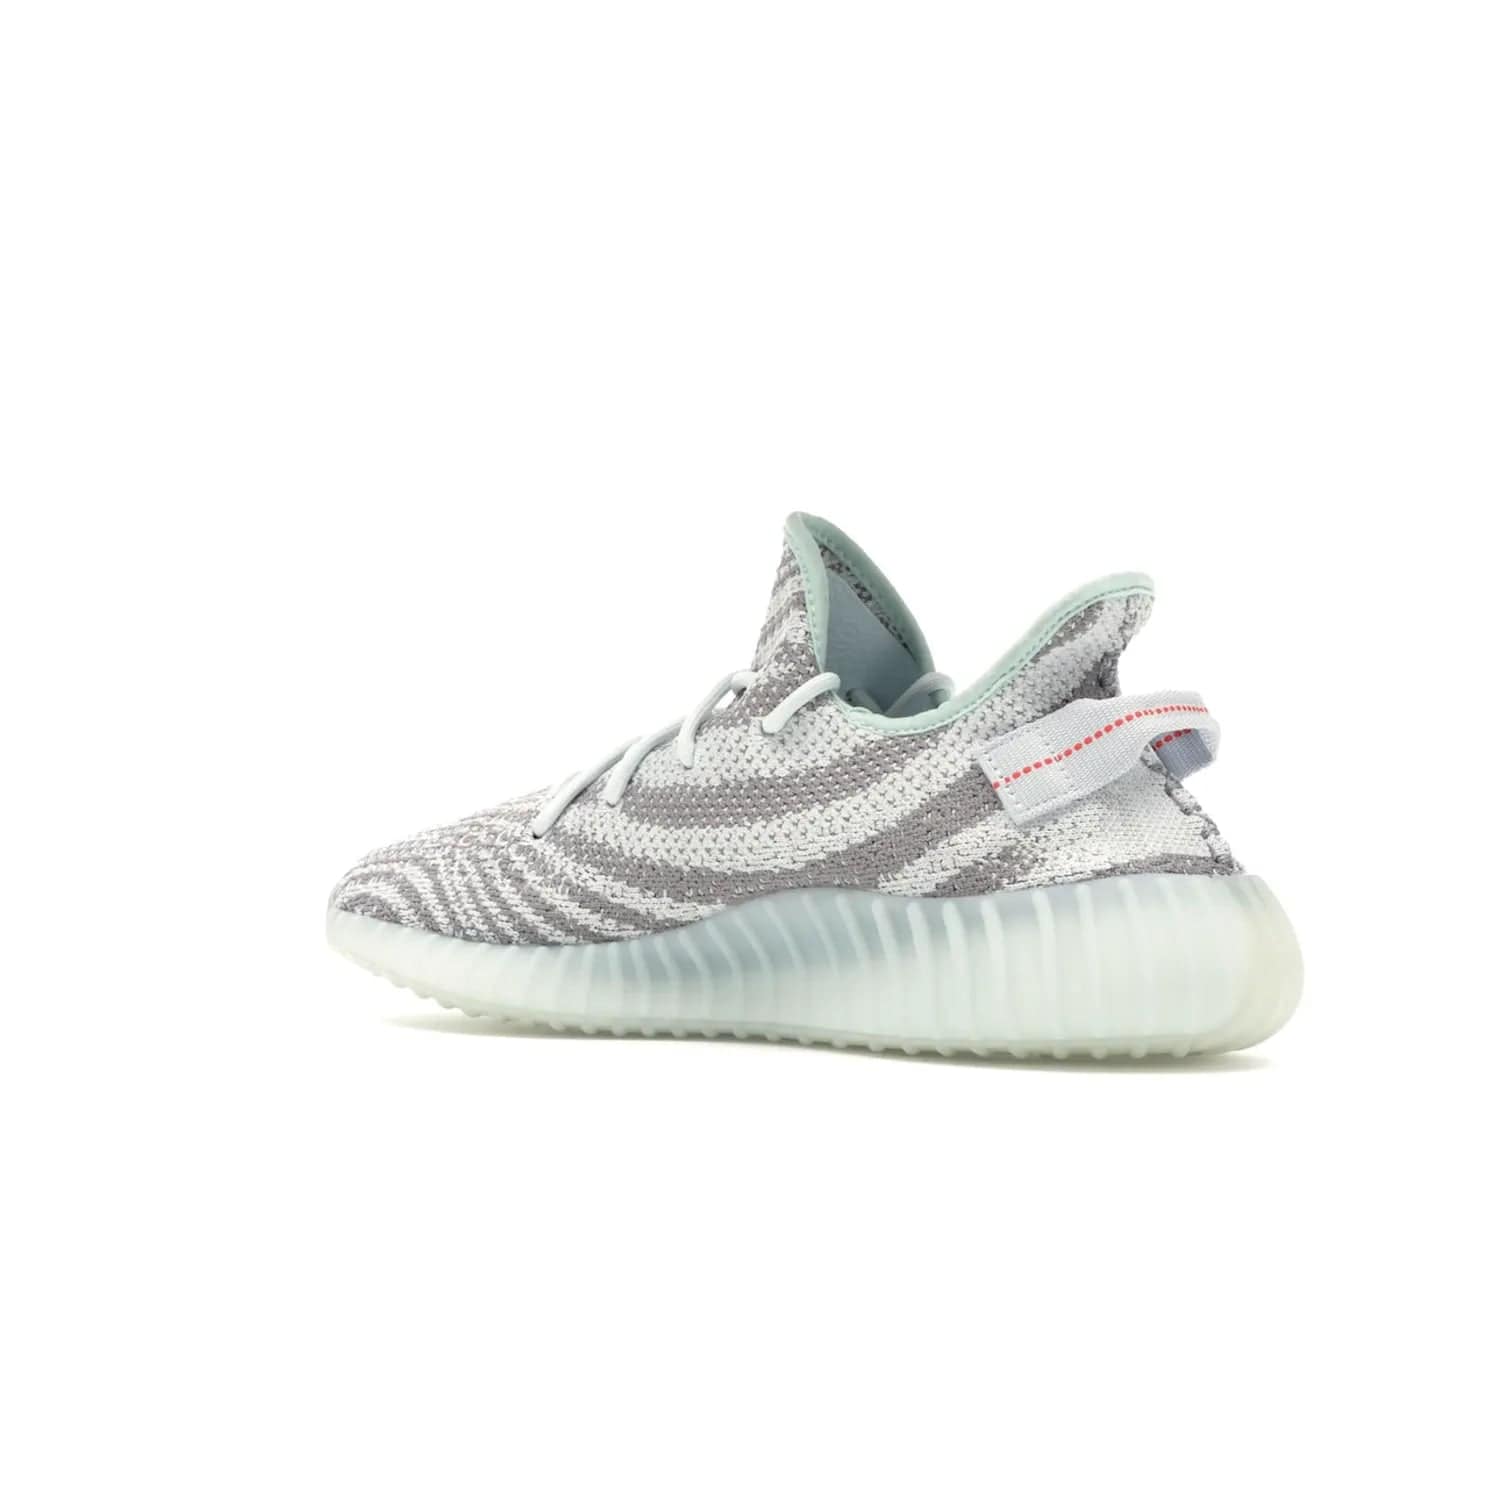 adidas Yeezy Boost 350 V2 Blue Tint - Image 23 - Only at www.BallersClubKickz.com - The adidas Yeezy Boost 350 V2 Blue Tint merges fashion and functionality with its Primeknit upper and Boost sole. Released in December 2017, this luxurious sneaker is perfect for making a stylish statement.